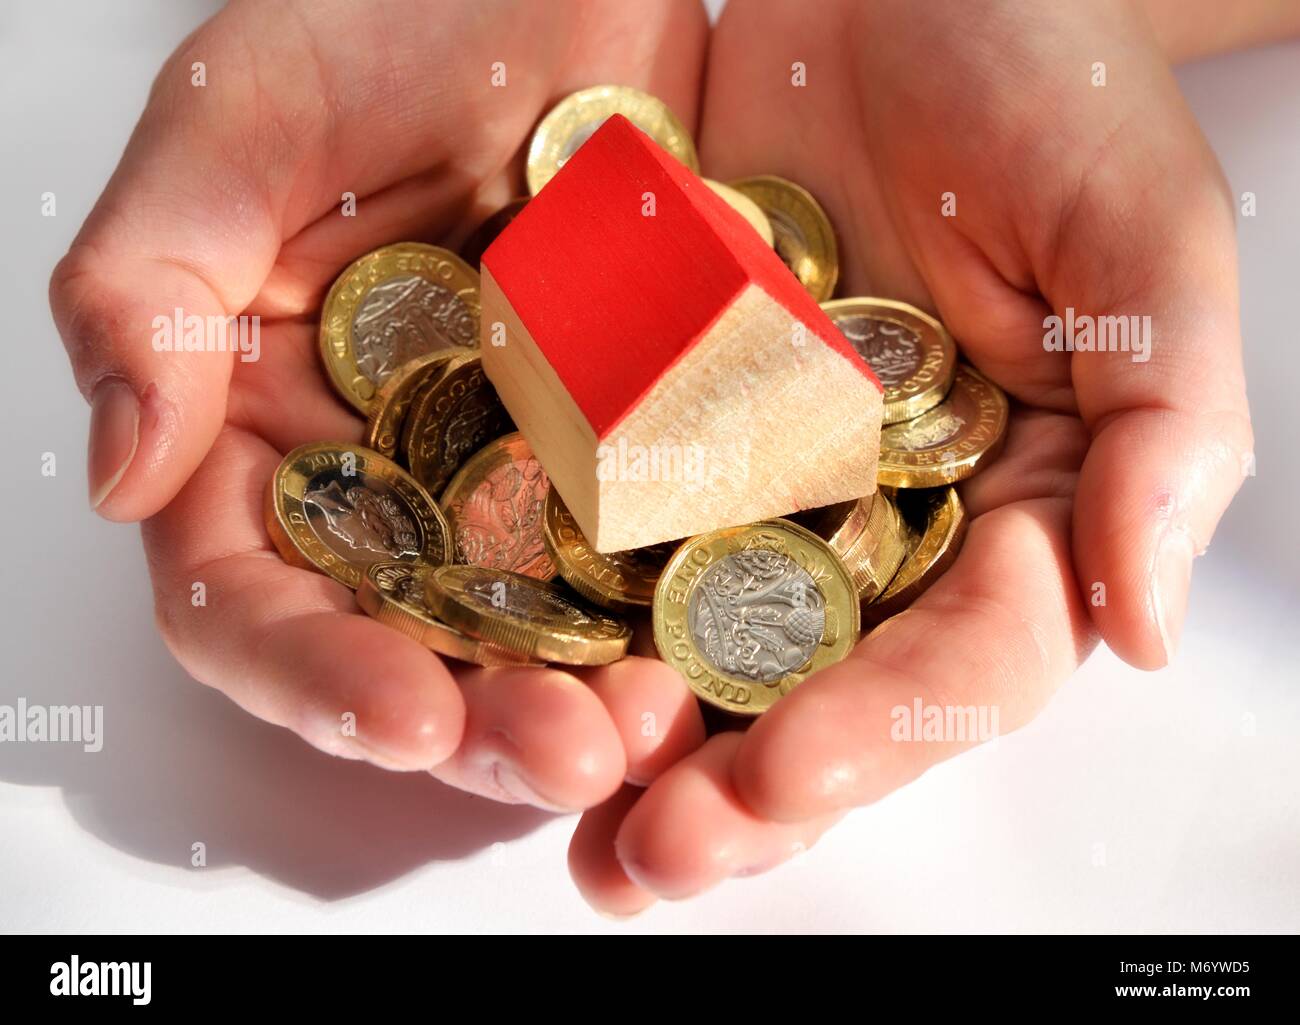 handful of one pound coins and a miniature house money cash savings concept Stock Photo